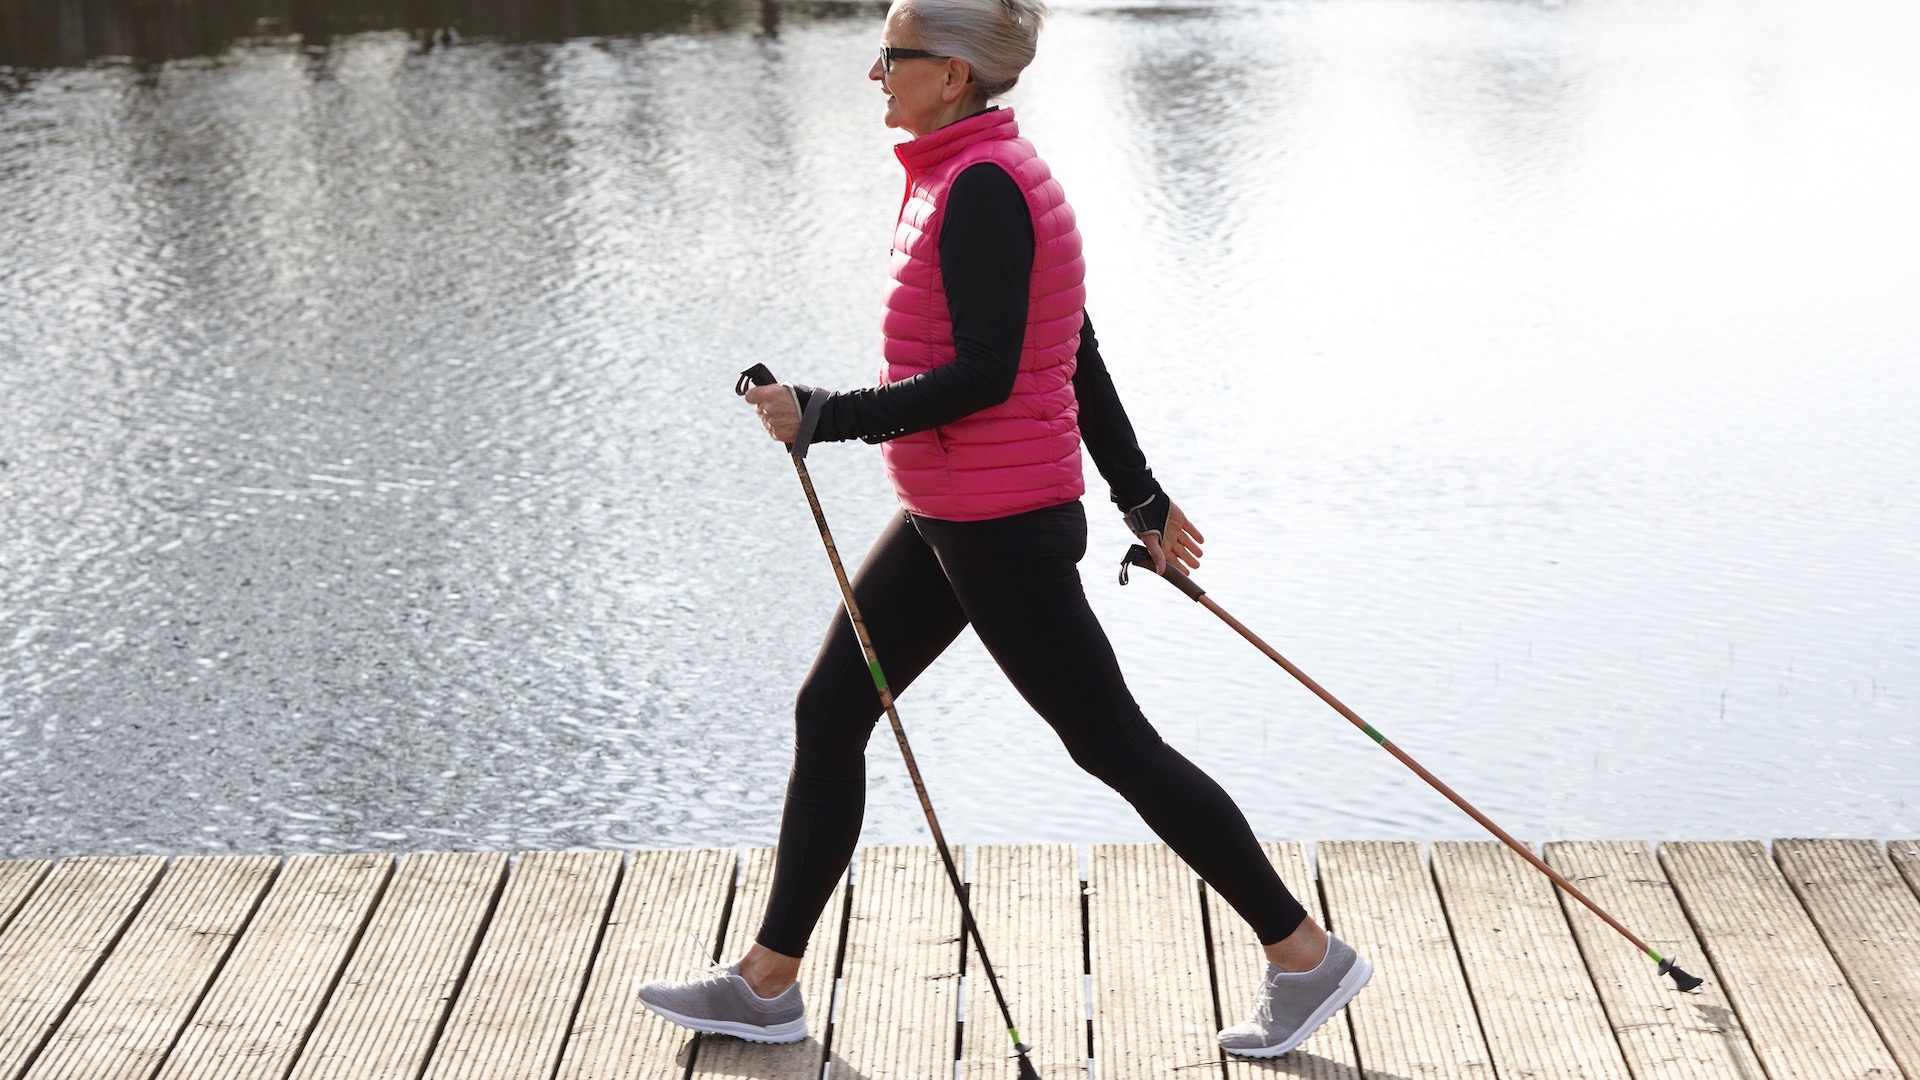 Bel terug koppel Ananiver What is Nordic walking – and why it might be a great activity for you |  Advnture